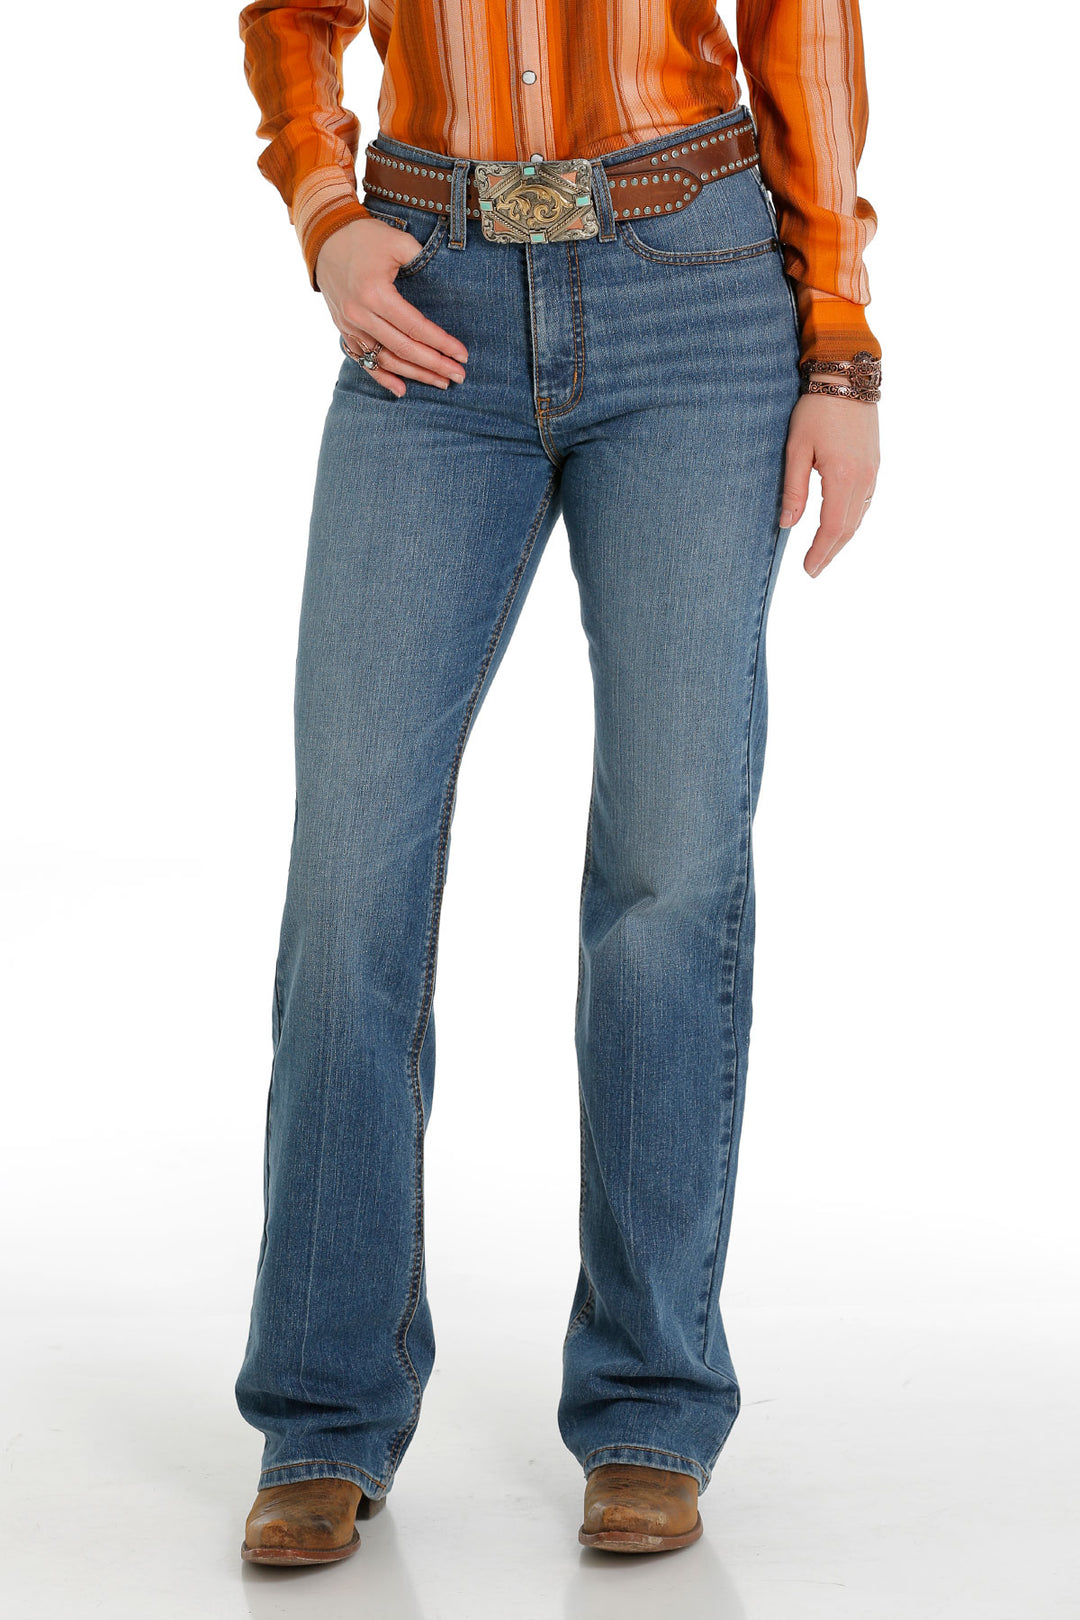 Western Bootcut Jeans  Joe Browns Official Site